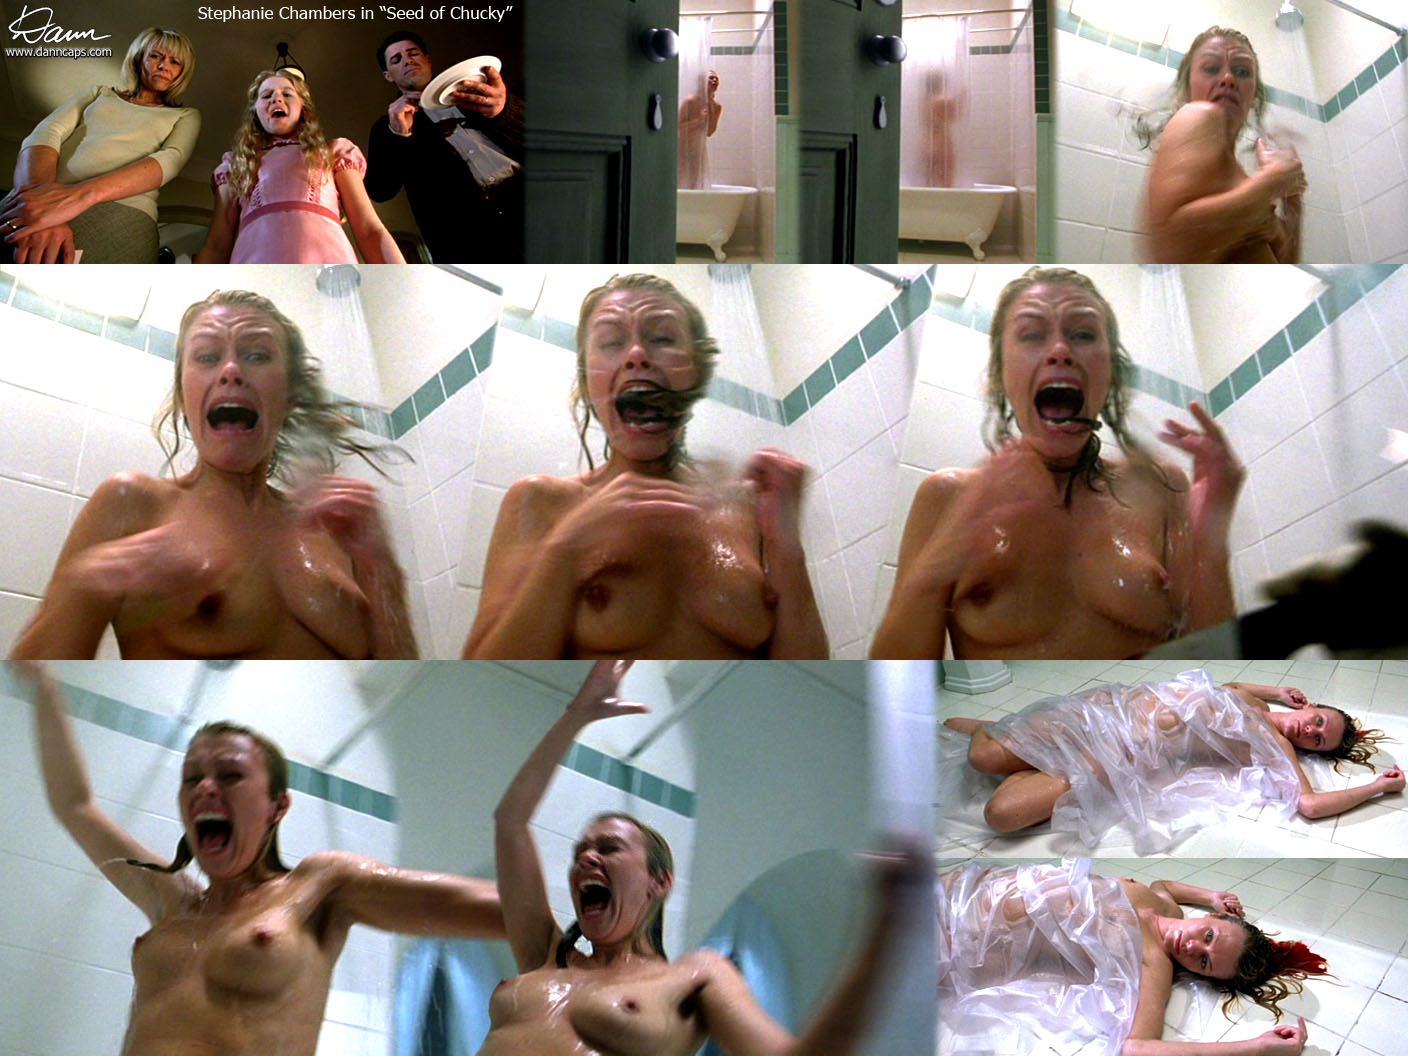 best of Scenes naked chucky